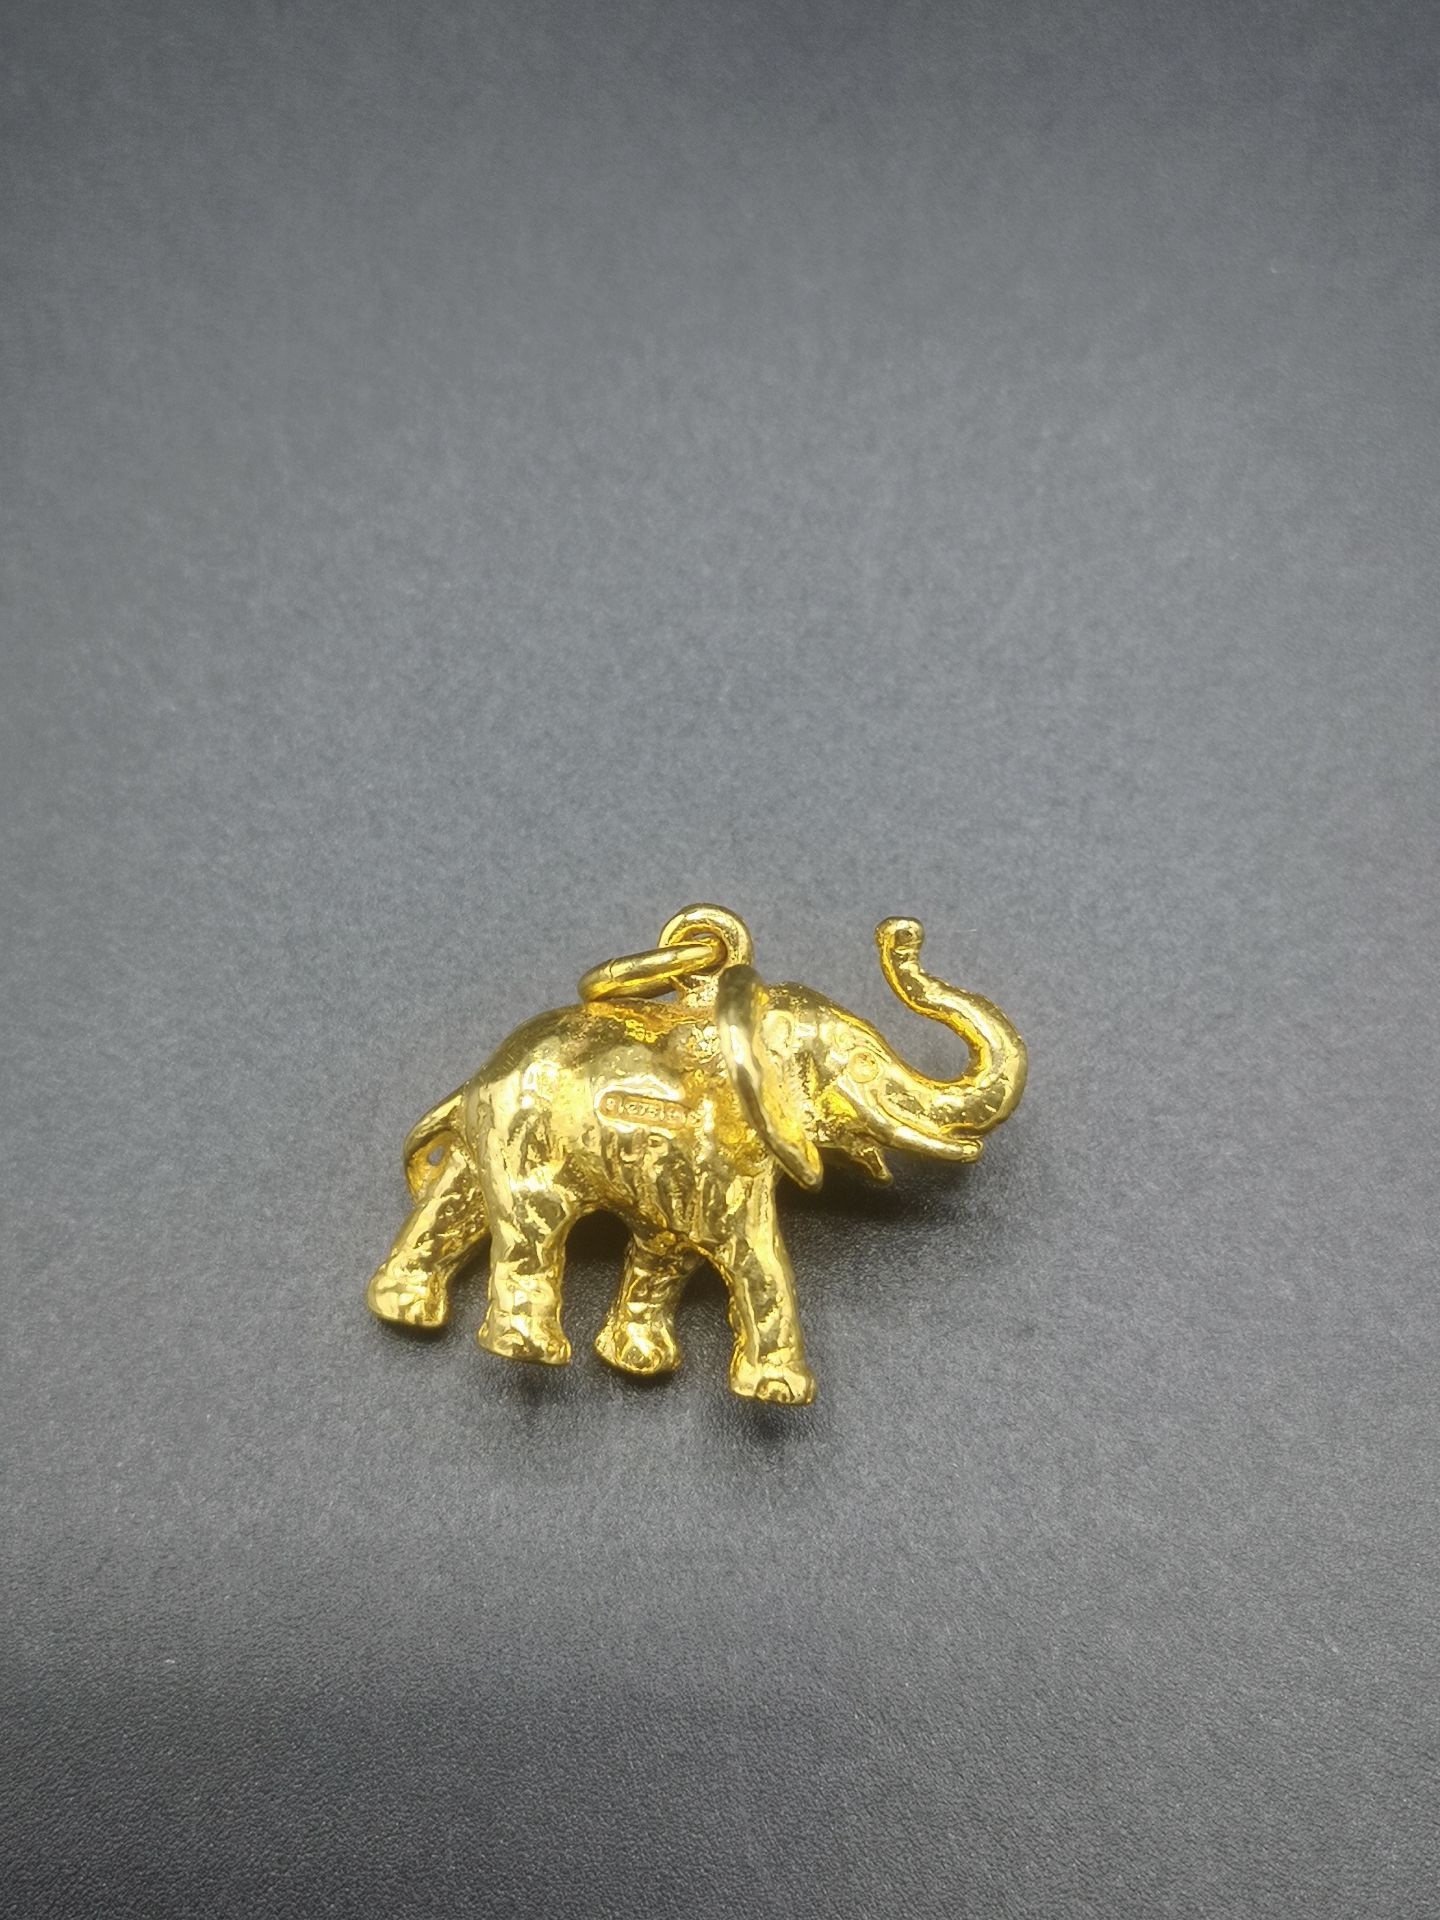 9ct gold pendant - Image 2 of 4